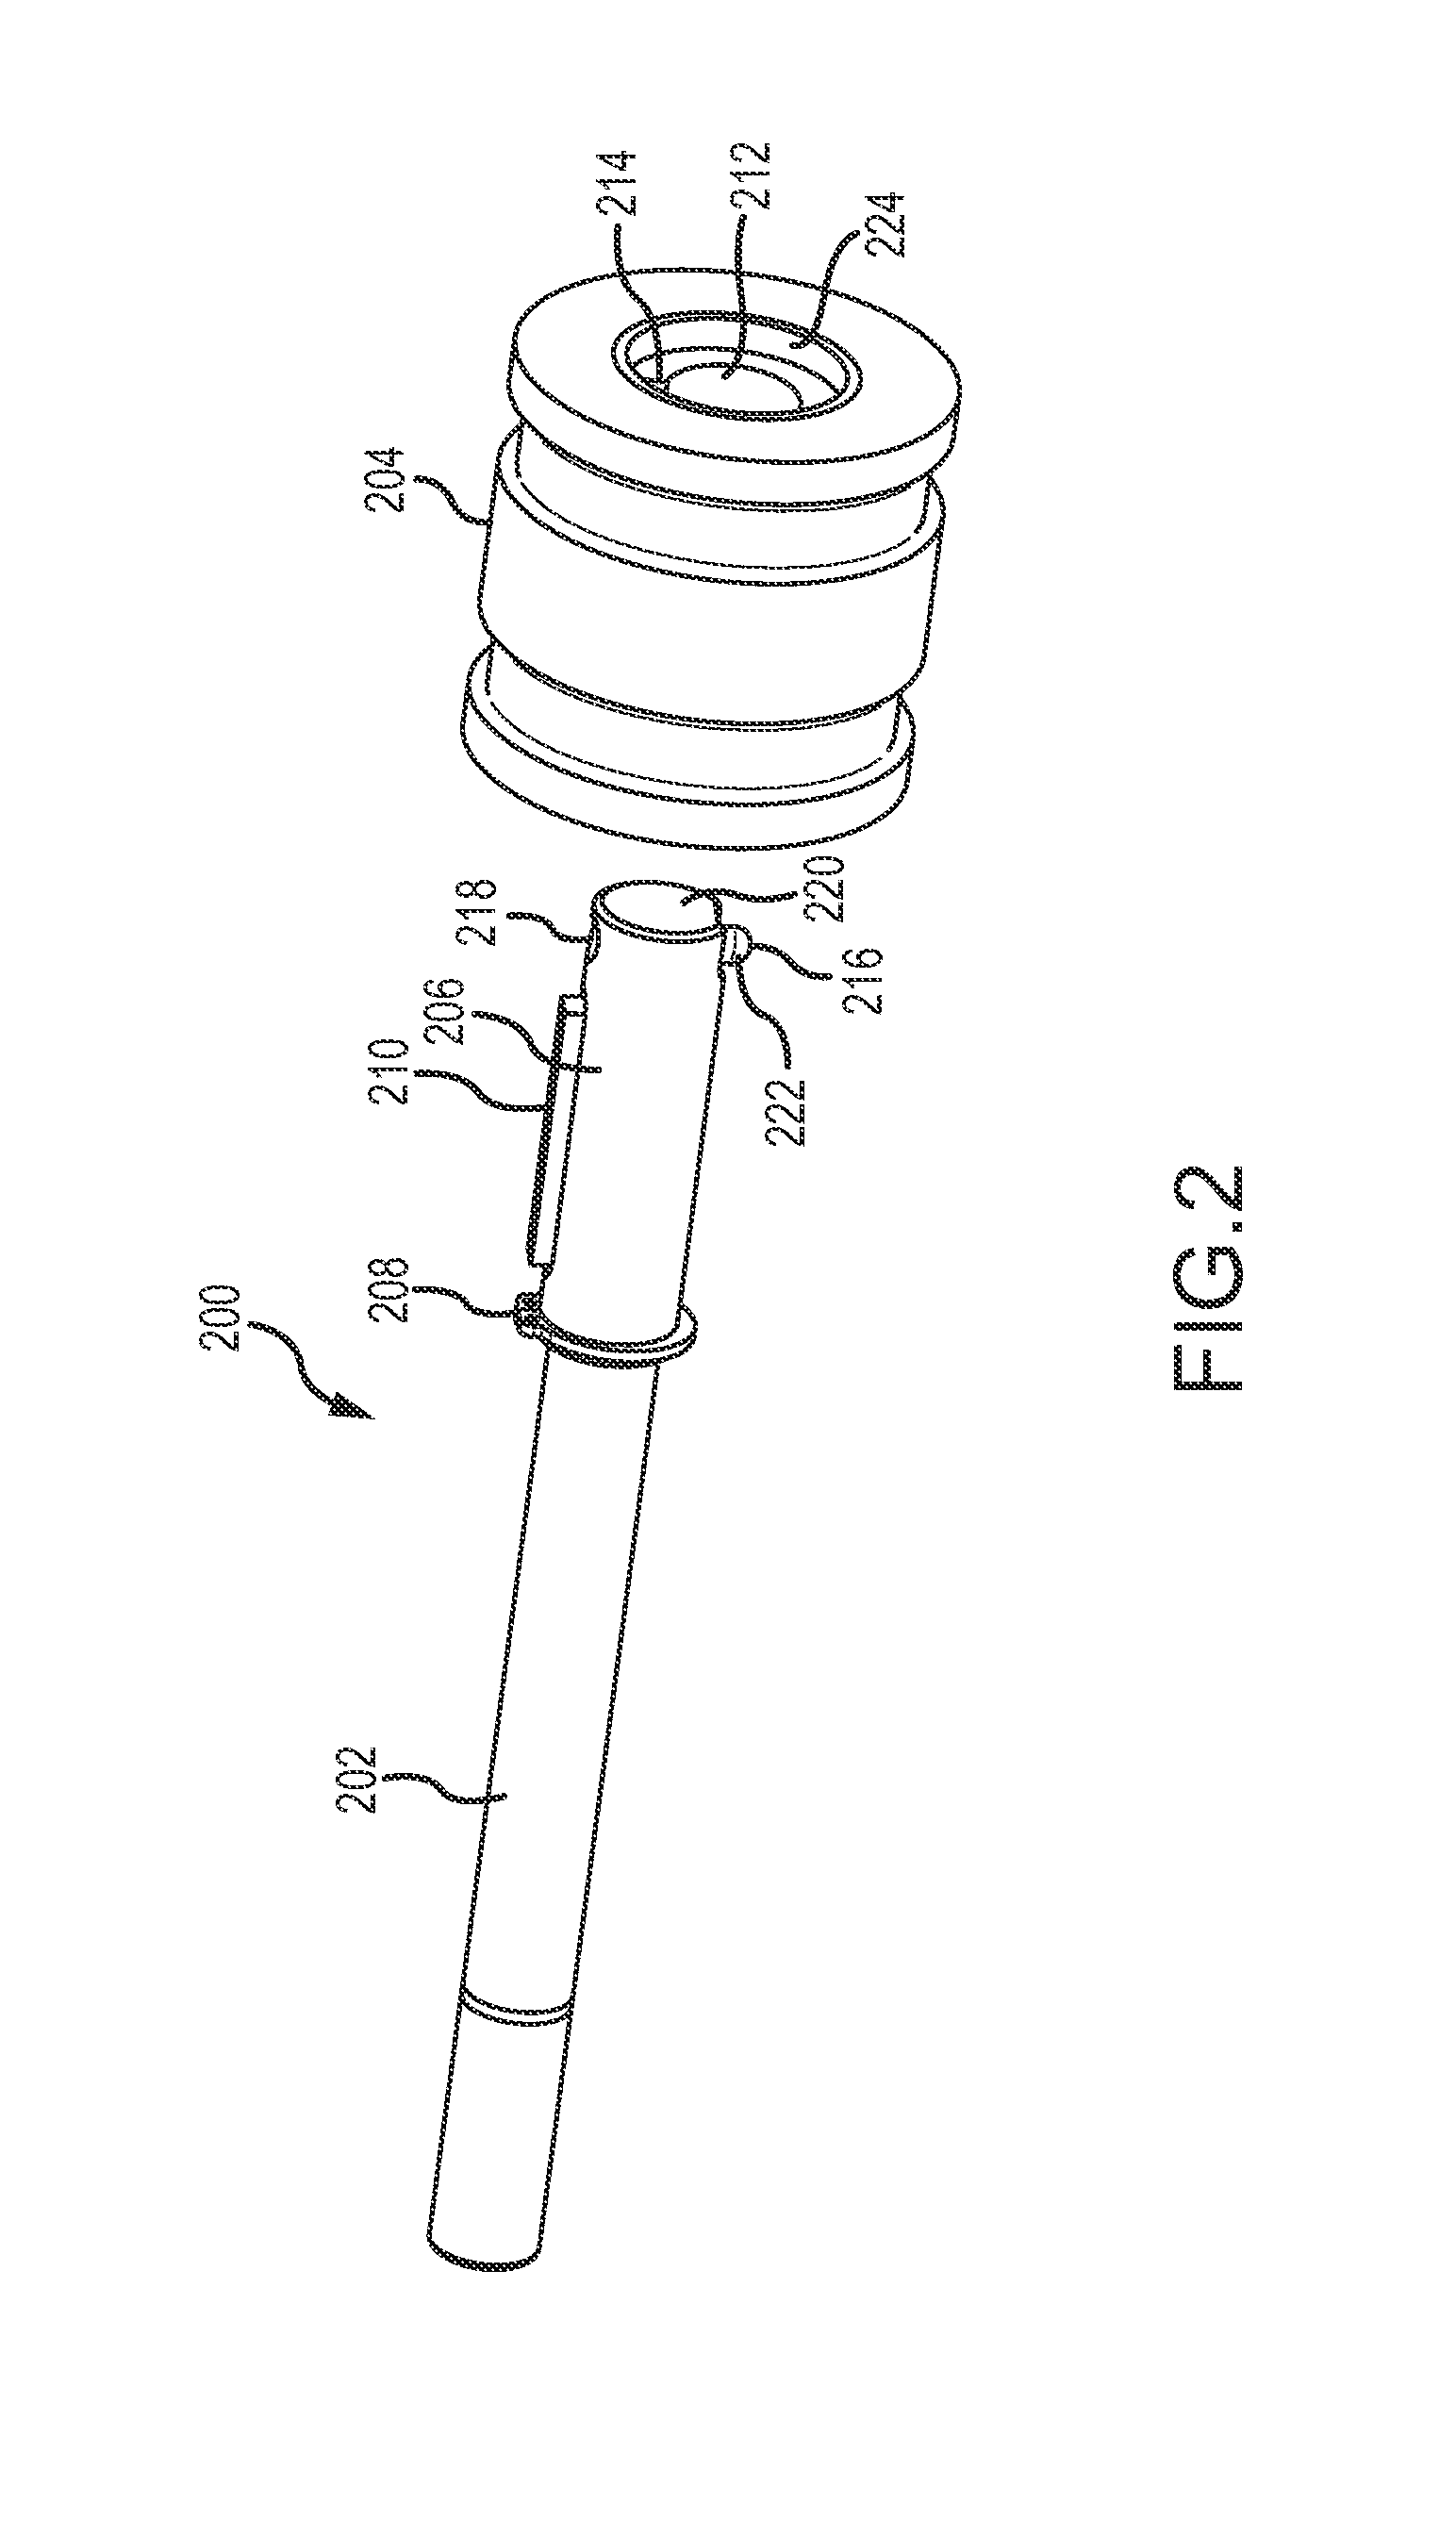 Flexible tube cleaning lance drive apparatus